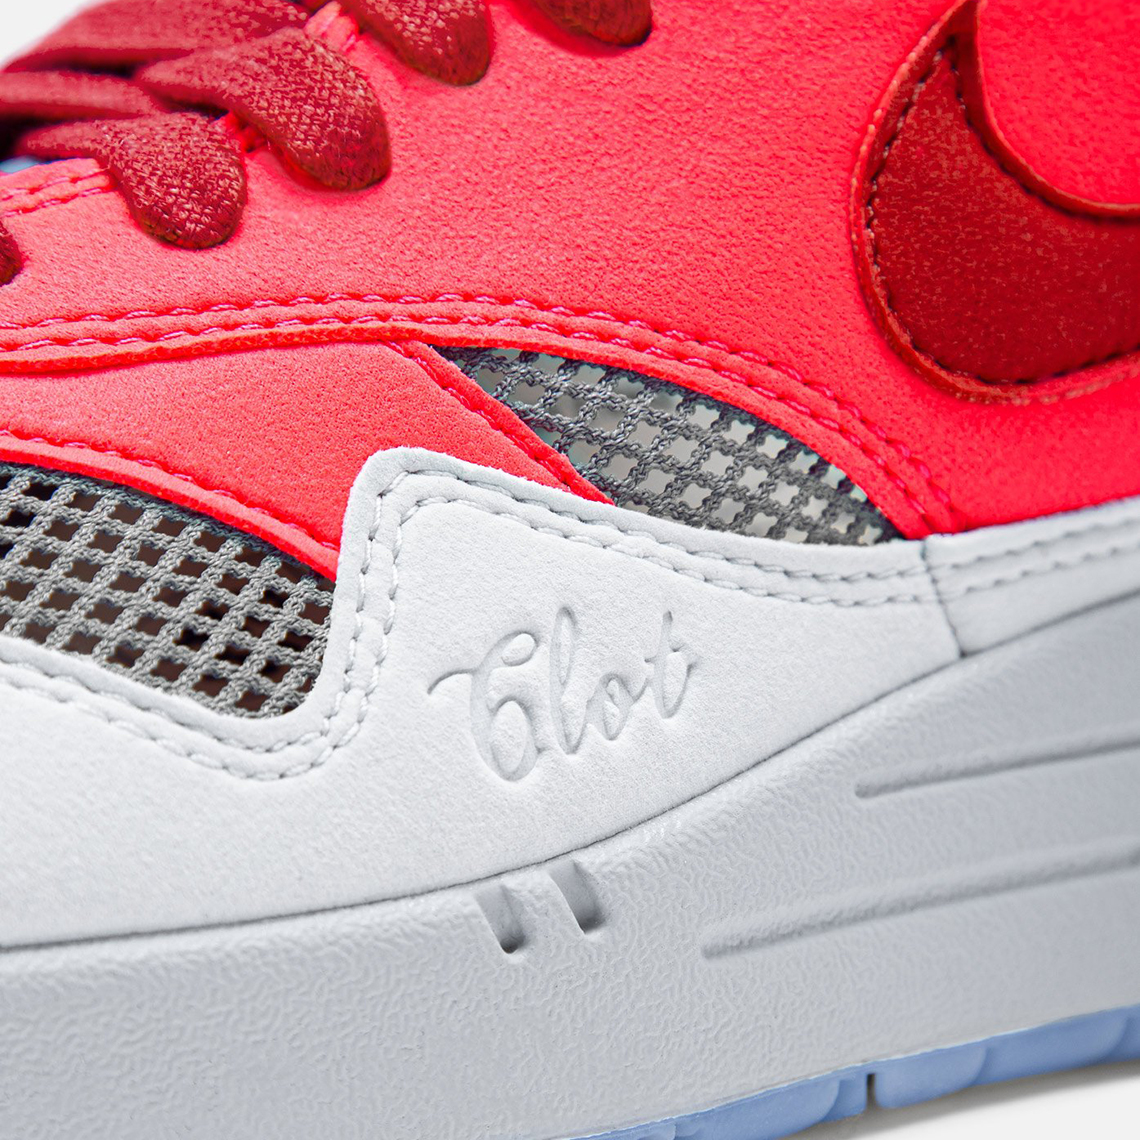 CLOT Nike Air Max 1 KOD Solar Red Release Date 5